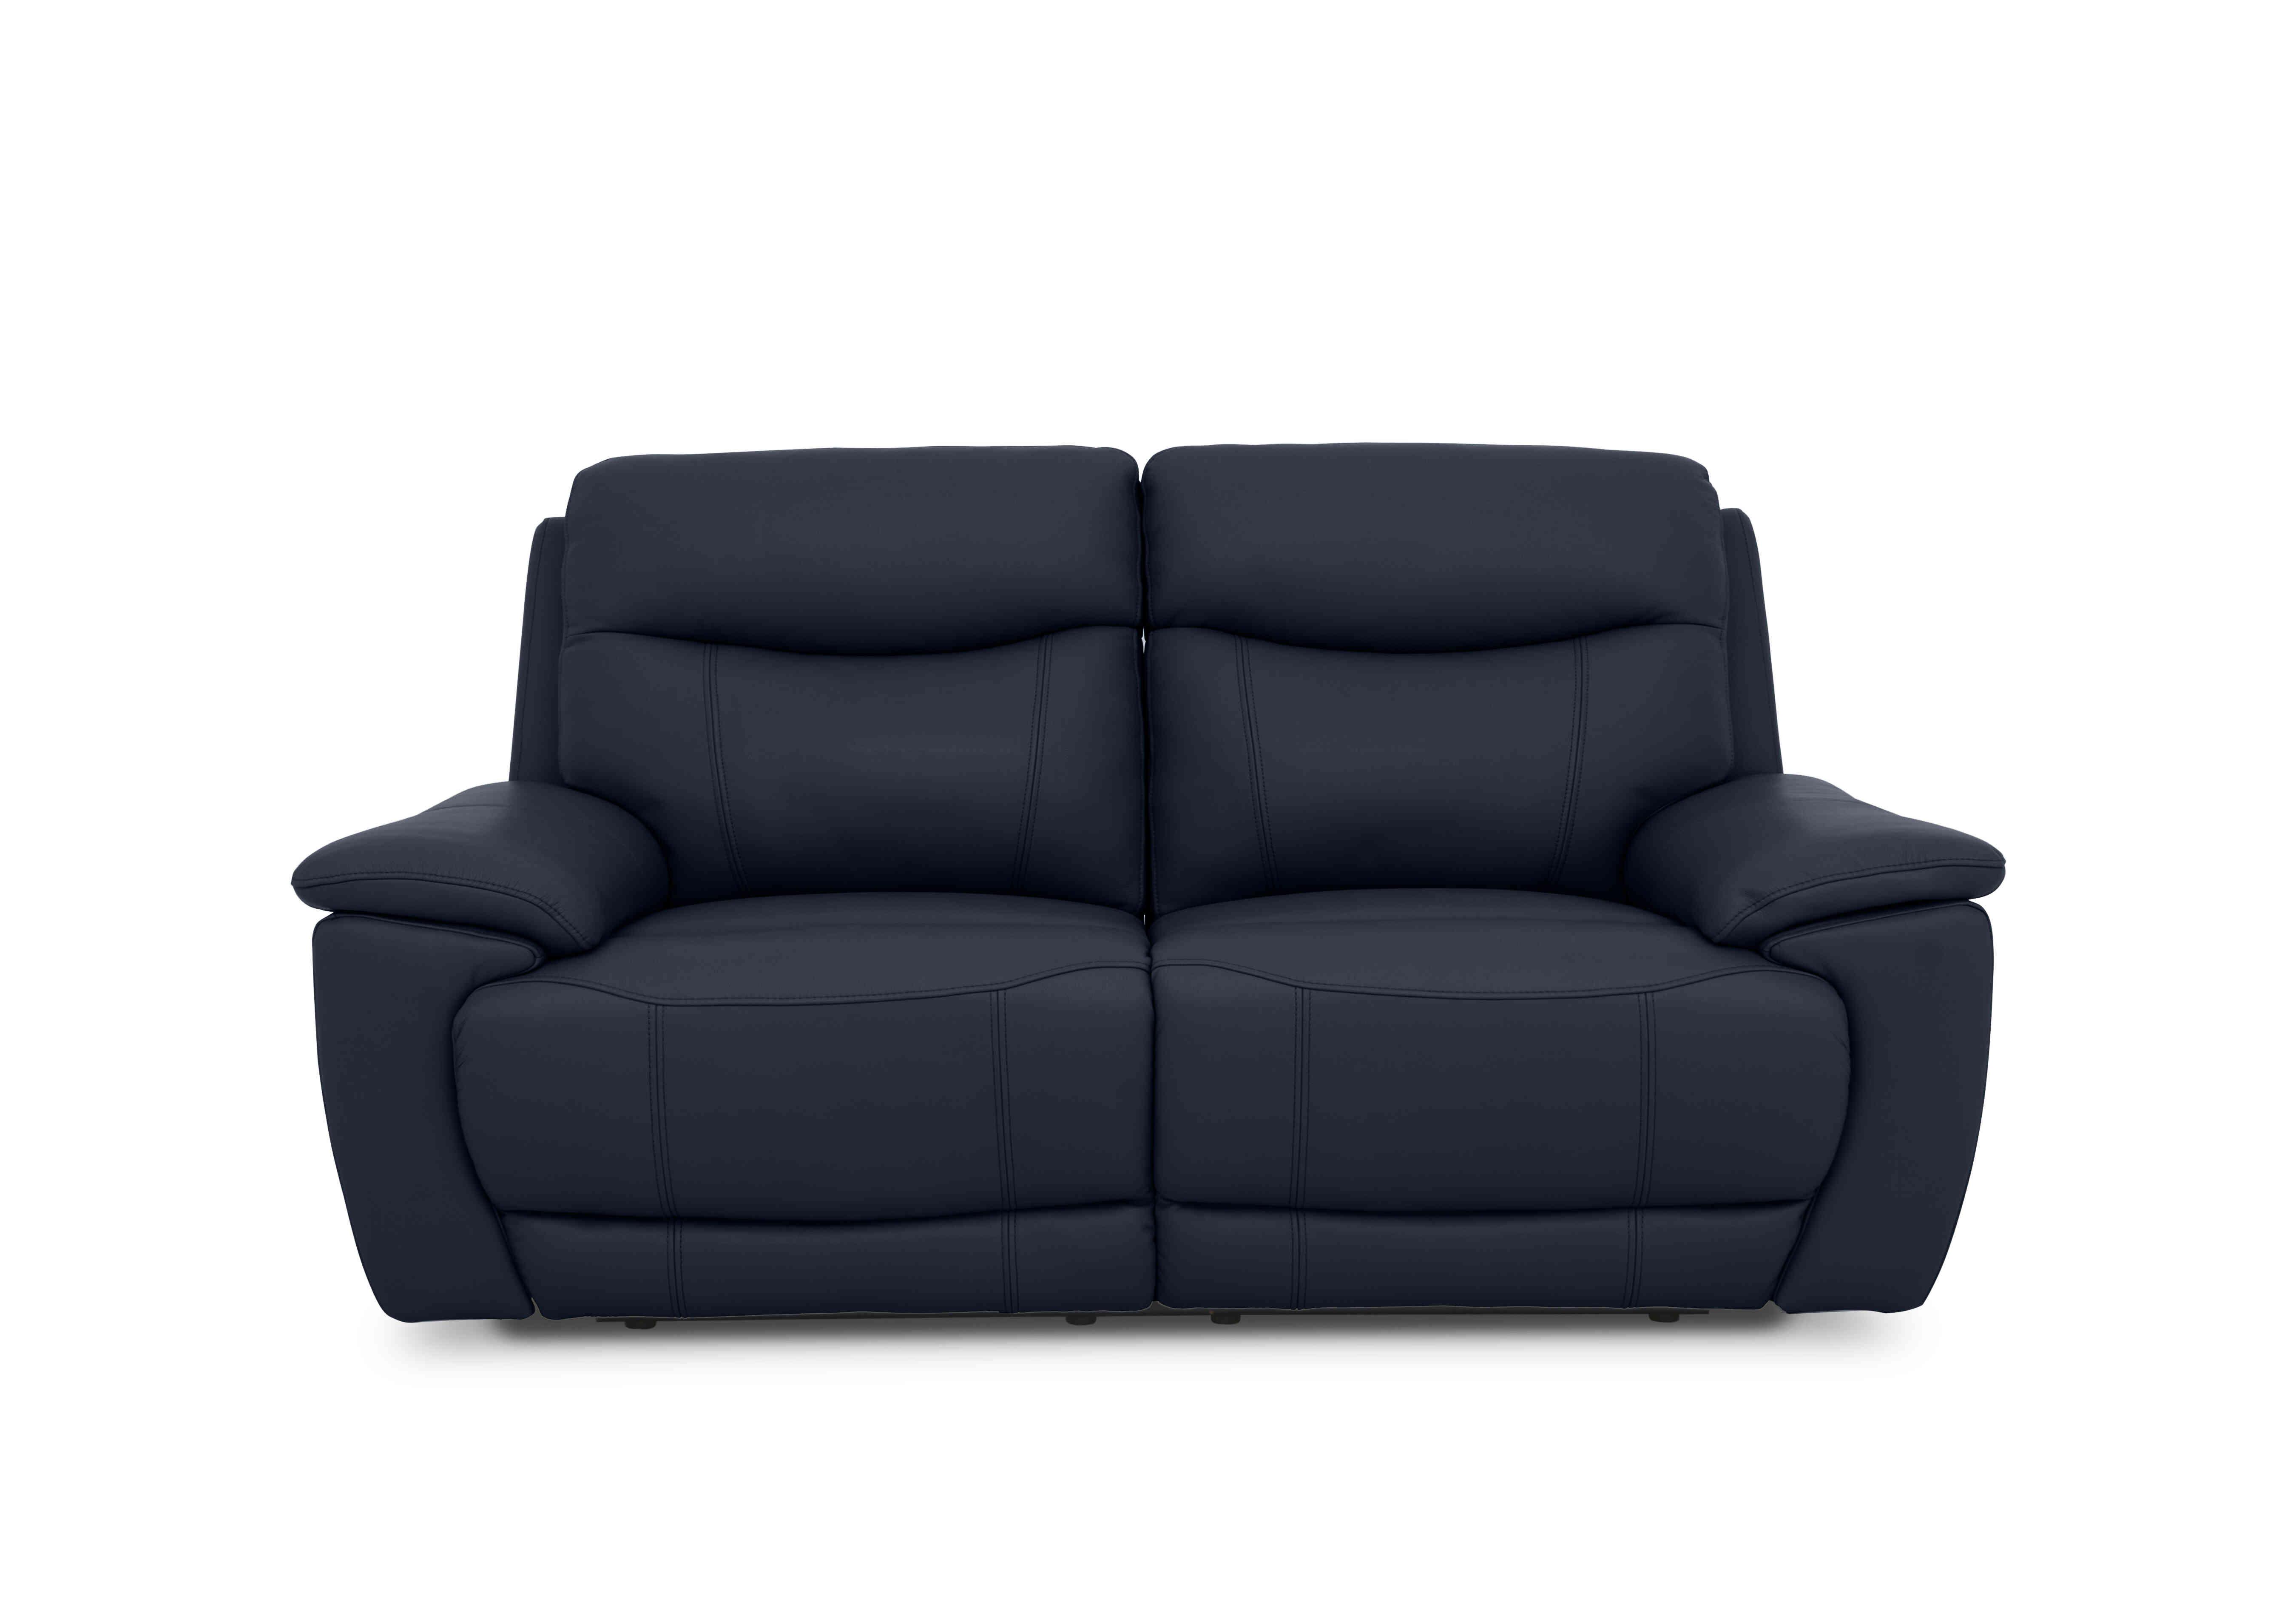 Sloane 3 Seater Leather Sofa in Cat-40/09 Peacock on Furniture Village